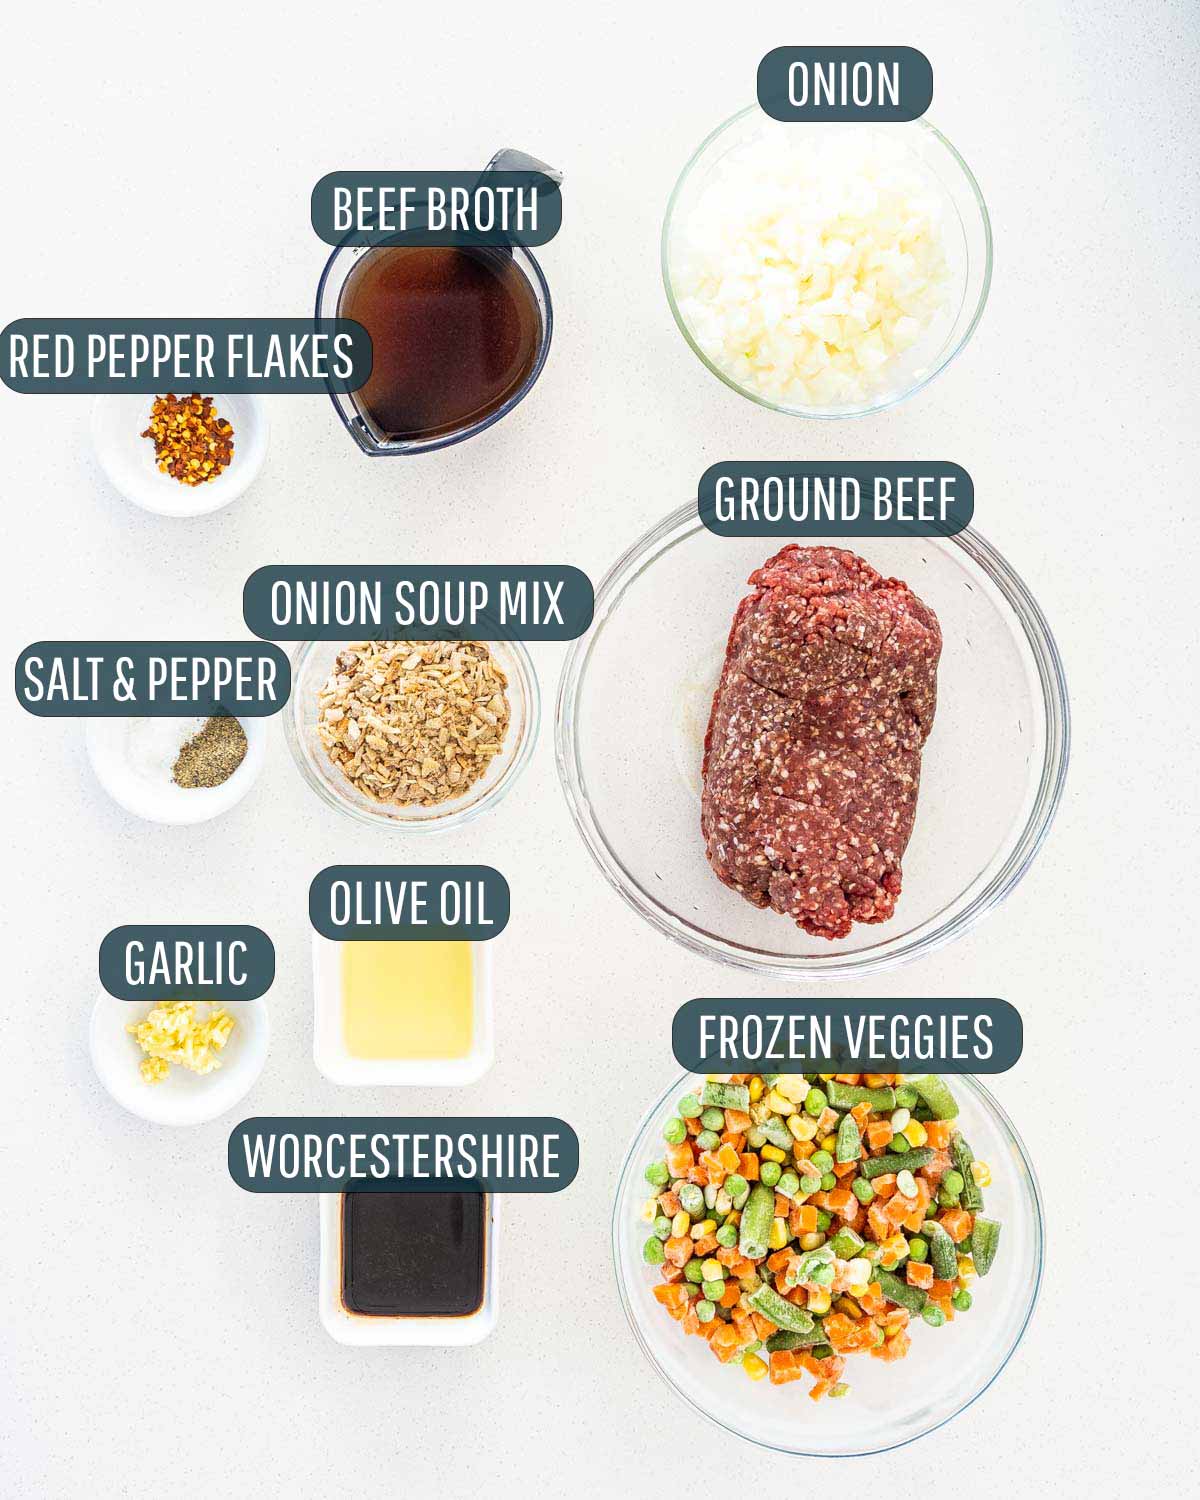 ingredients needed to make the filling for shepherd's pie.